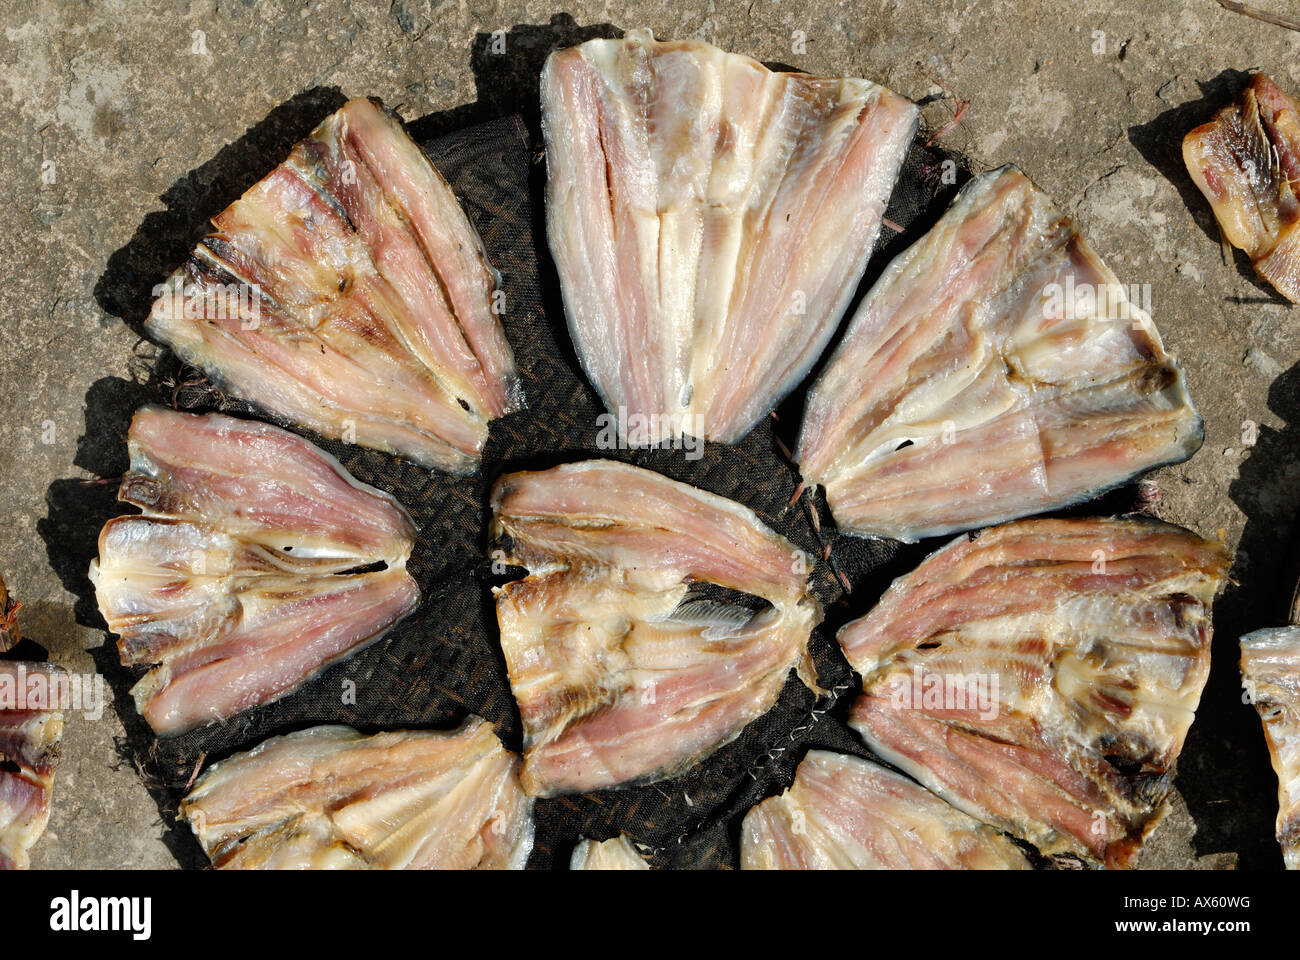 Fish from the mecong river dries in the sun, Vietnam Stock Photo